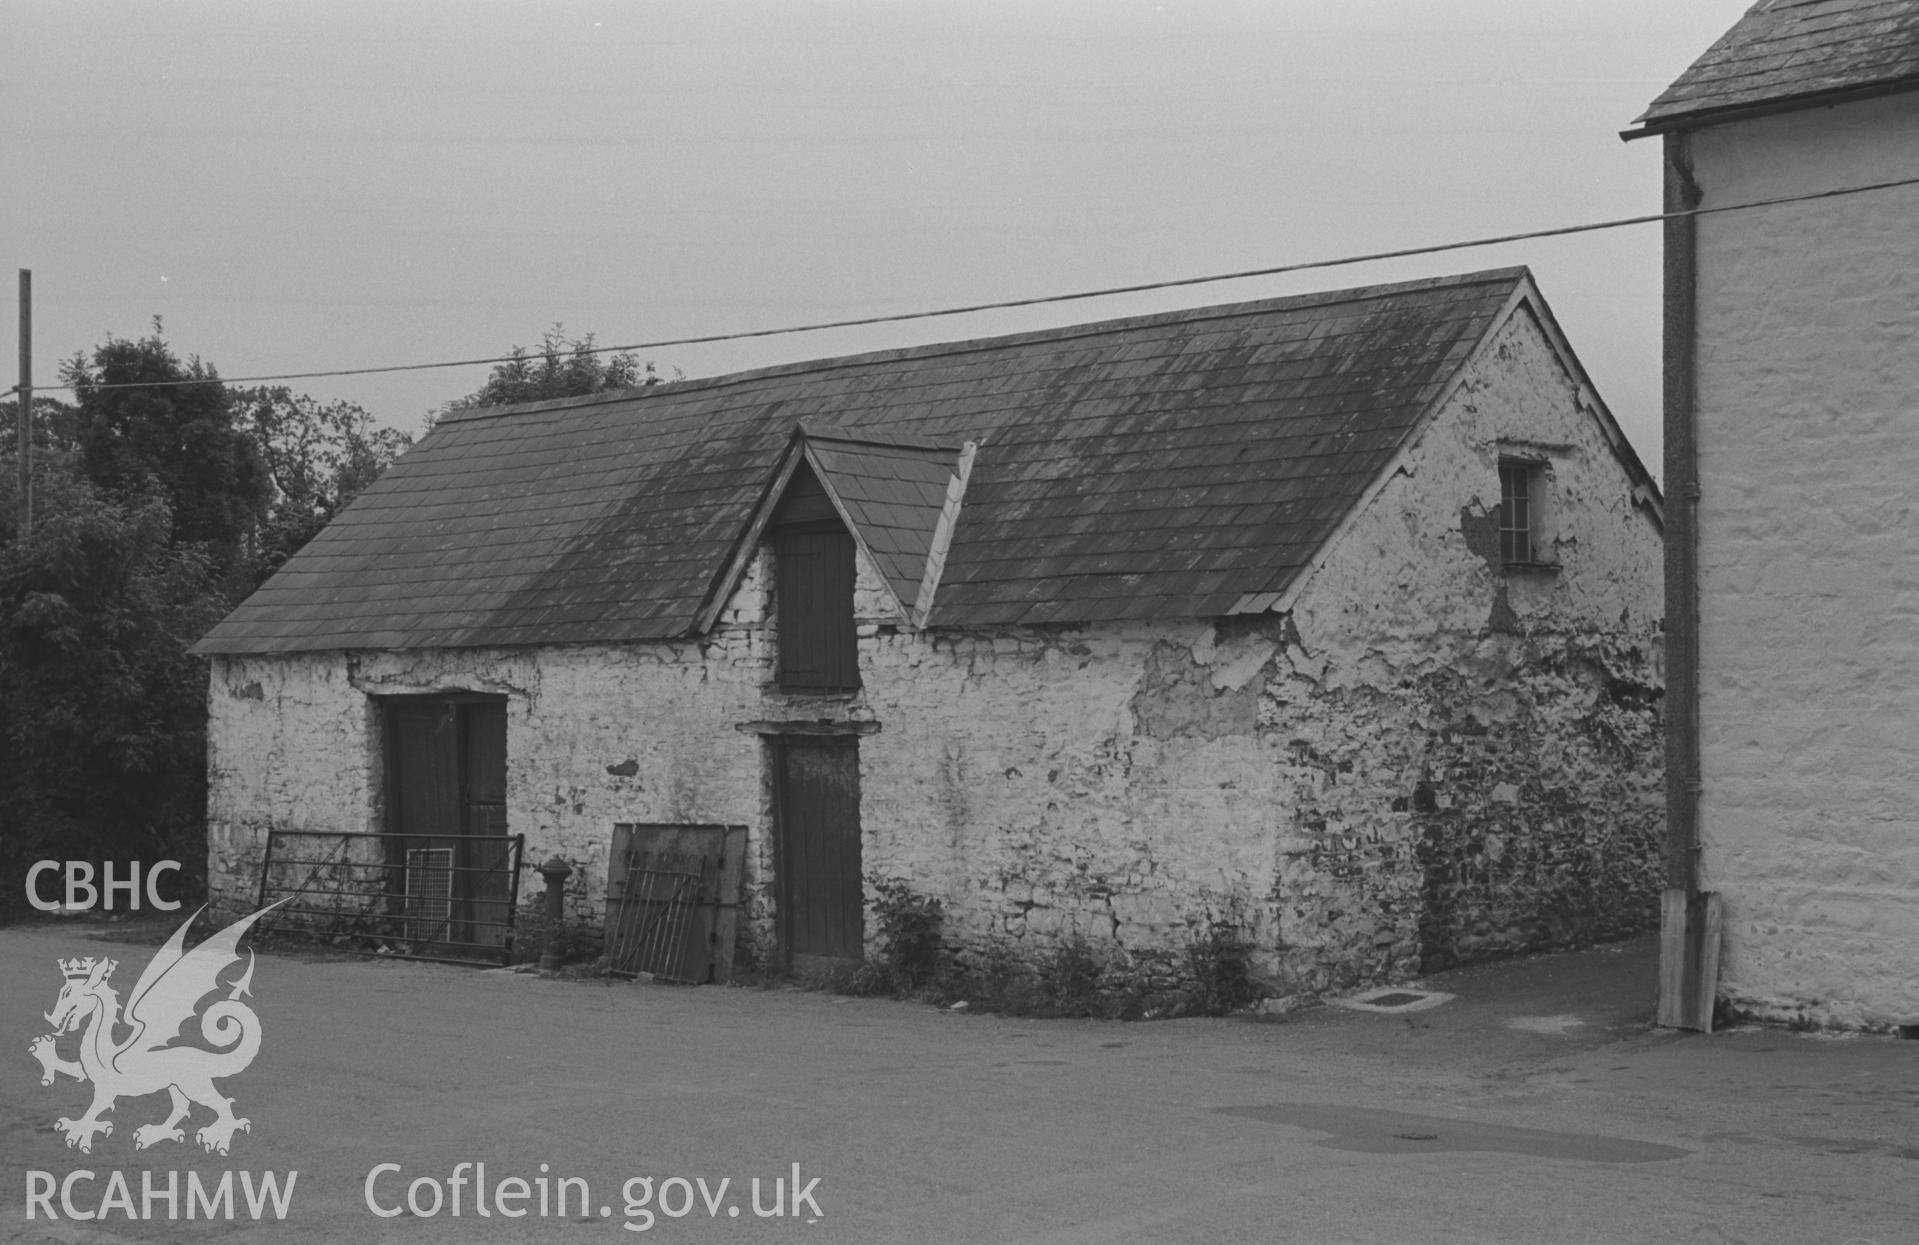 Digital copy of a black and white negative showing building on the west side of the road at the south end of Talsarn, south east of Aberaeron. Photographed by Arthur O. Chater on 5th September 1966 looking south west from Grid Reference SN 545 563.